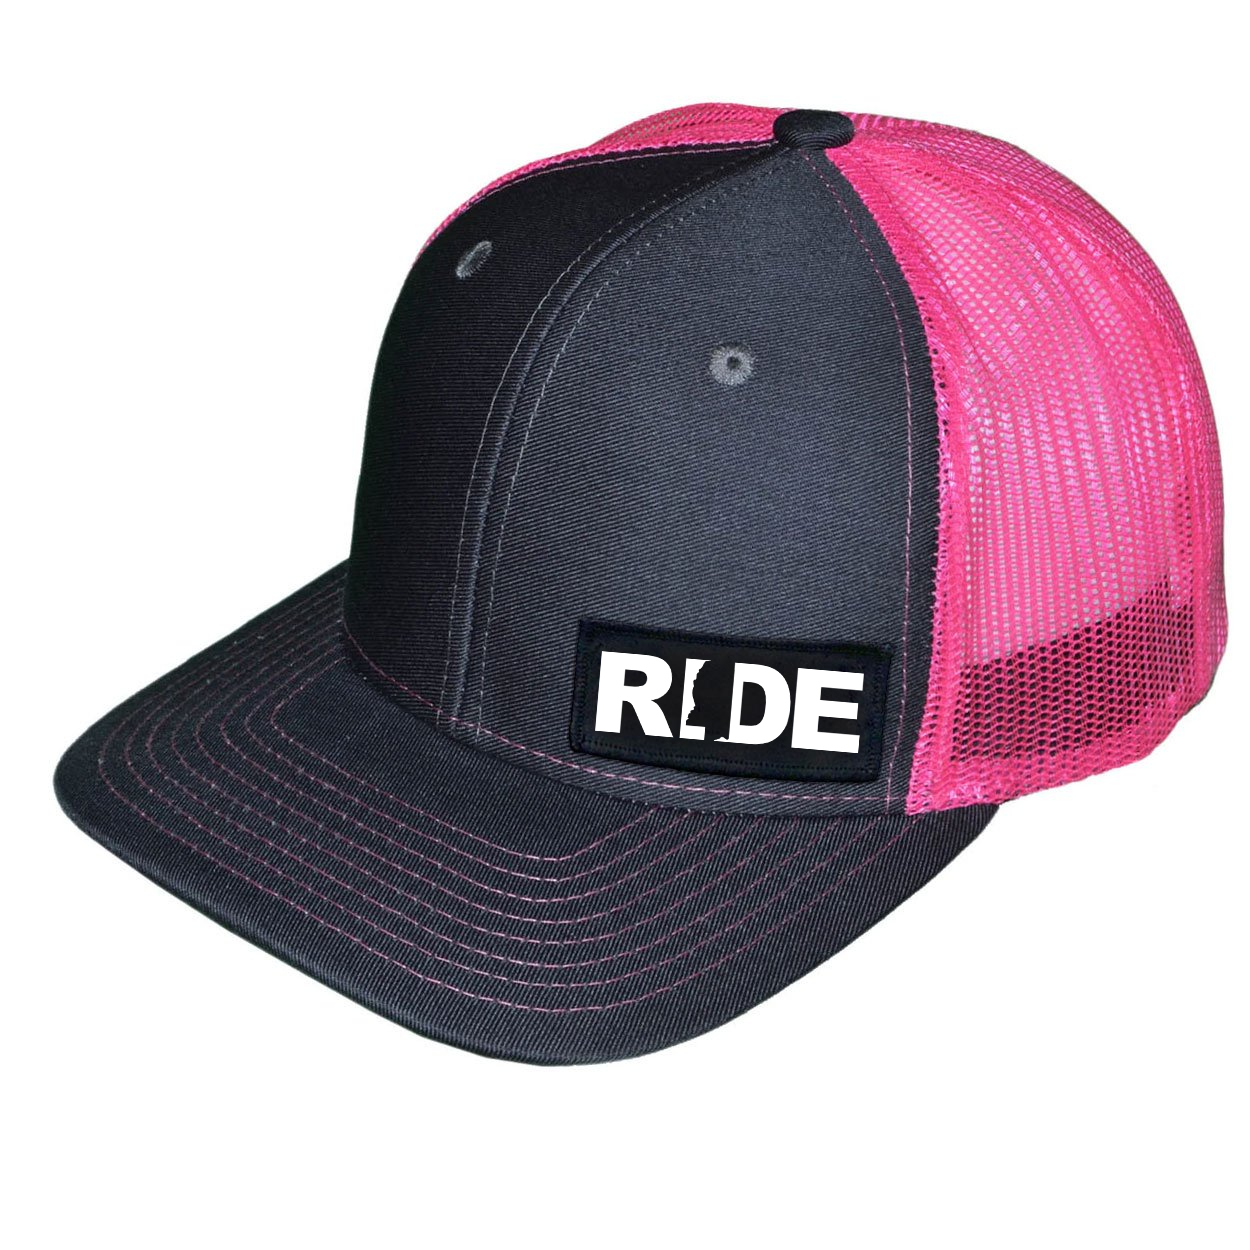 Ride Mississippi Night Out Woven Patch Snapback Trucker Hat Charcoal/Neon Pink (White Logo)